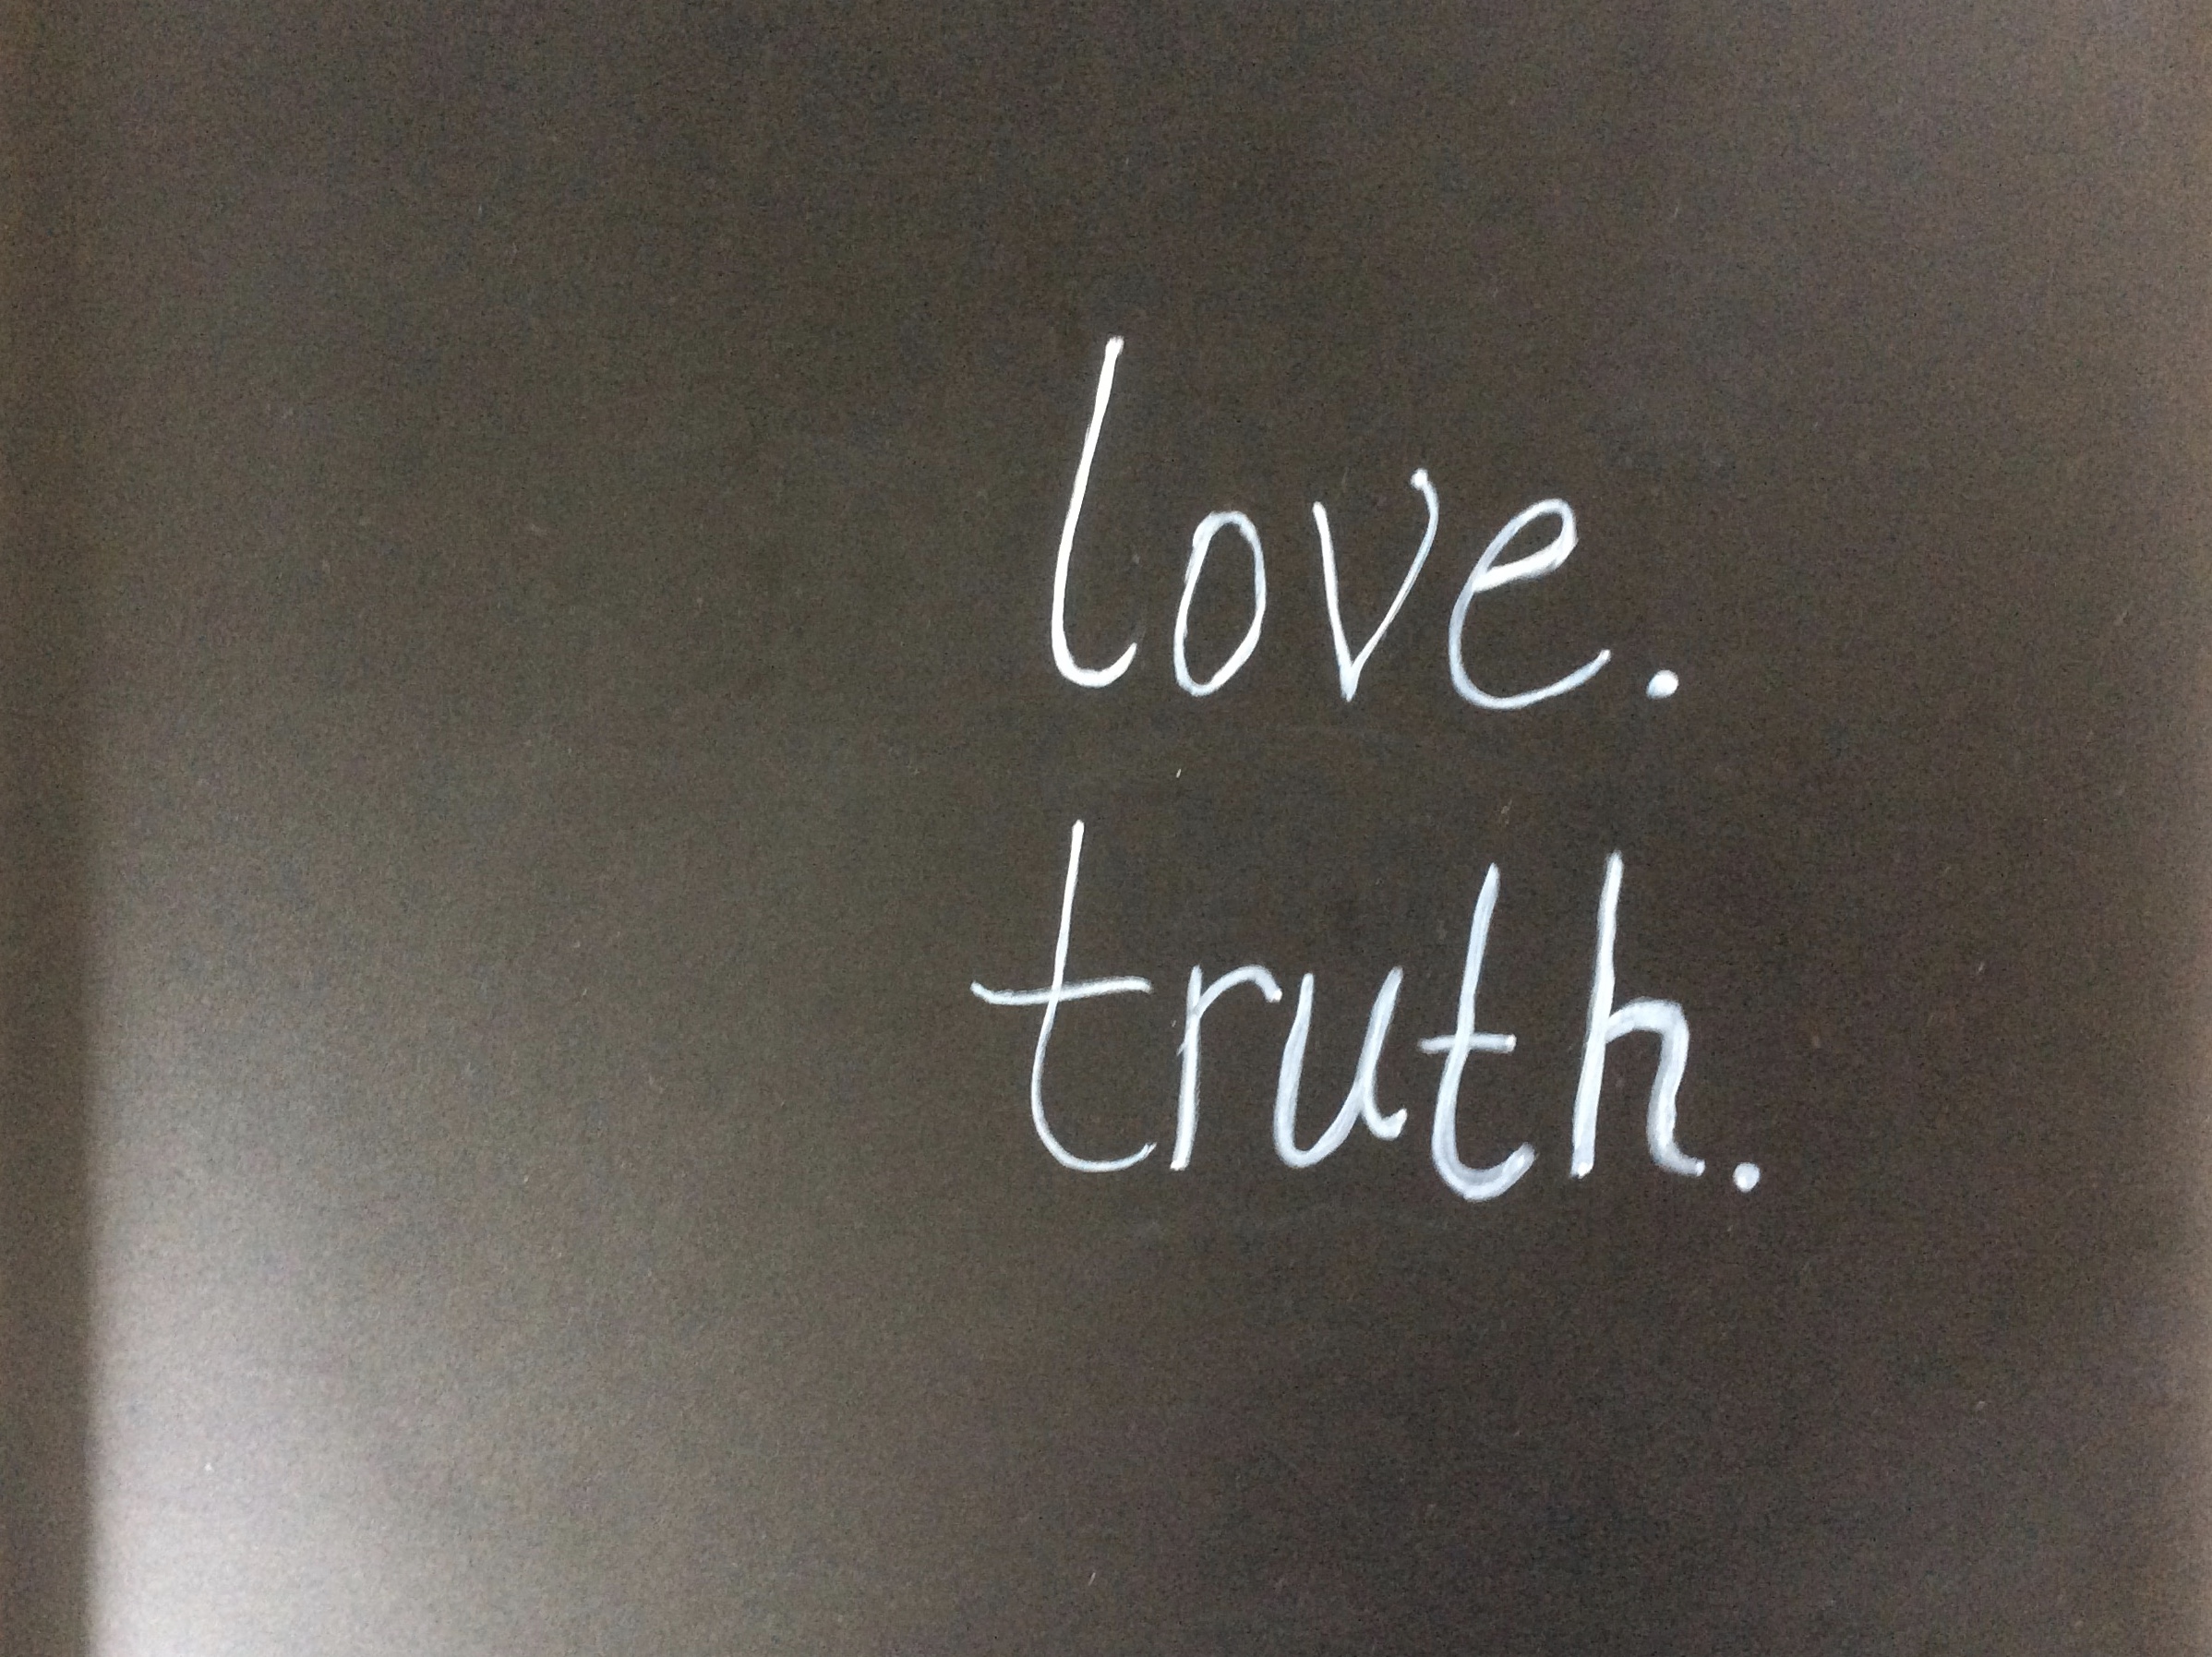 love and truth.